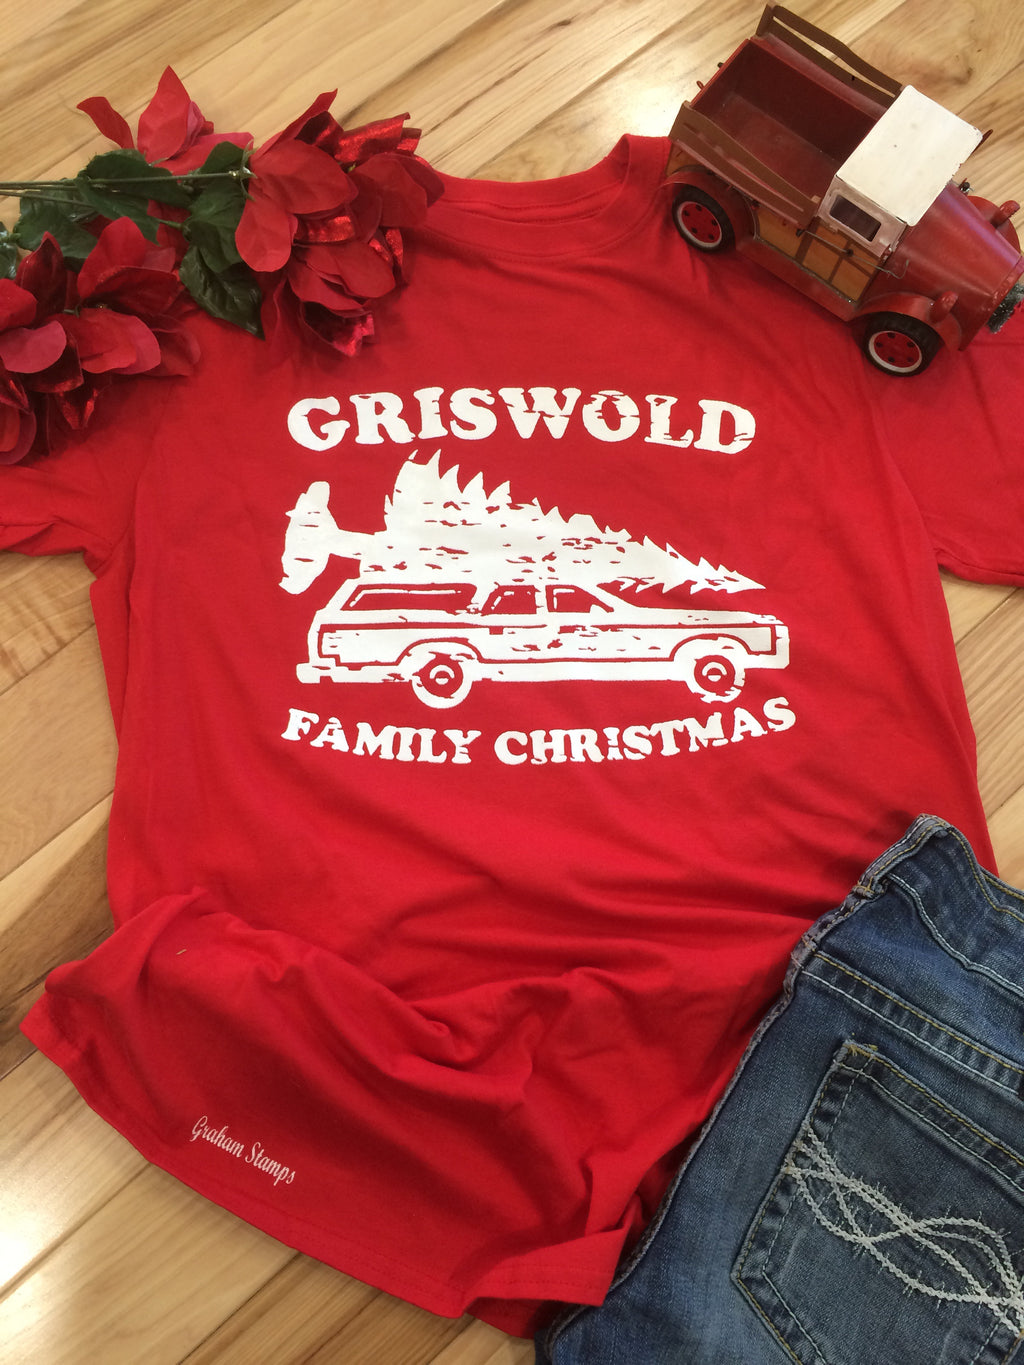 Griswold family Christmas